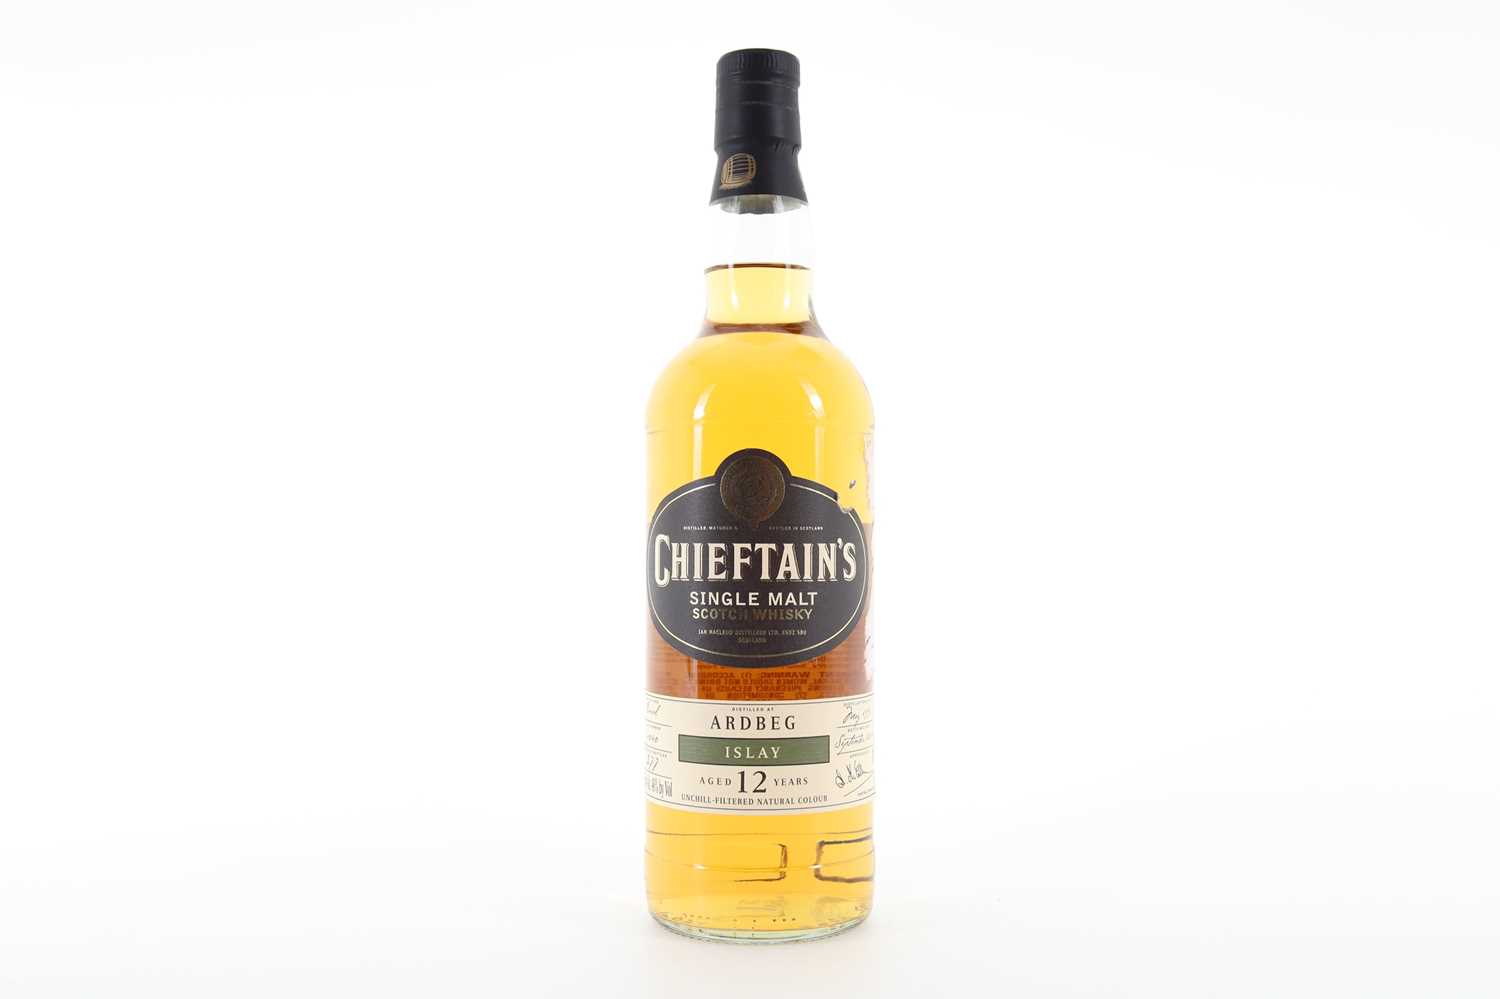 Lot 60 - ARDBEG 1998 12 YEAR OLD CHIEFTAIN'S 75CL